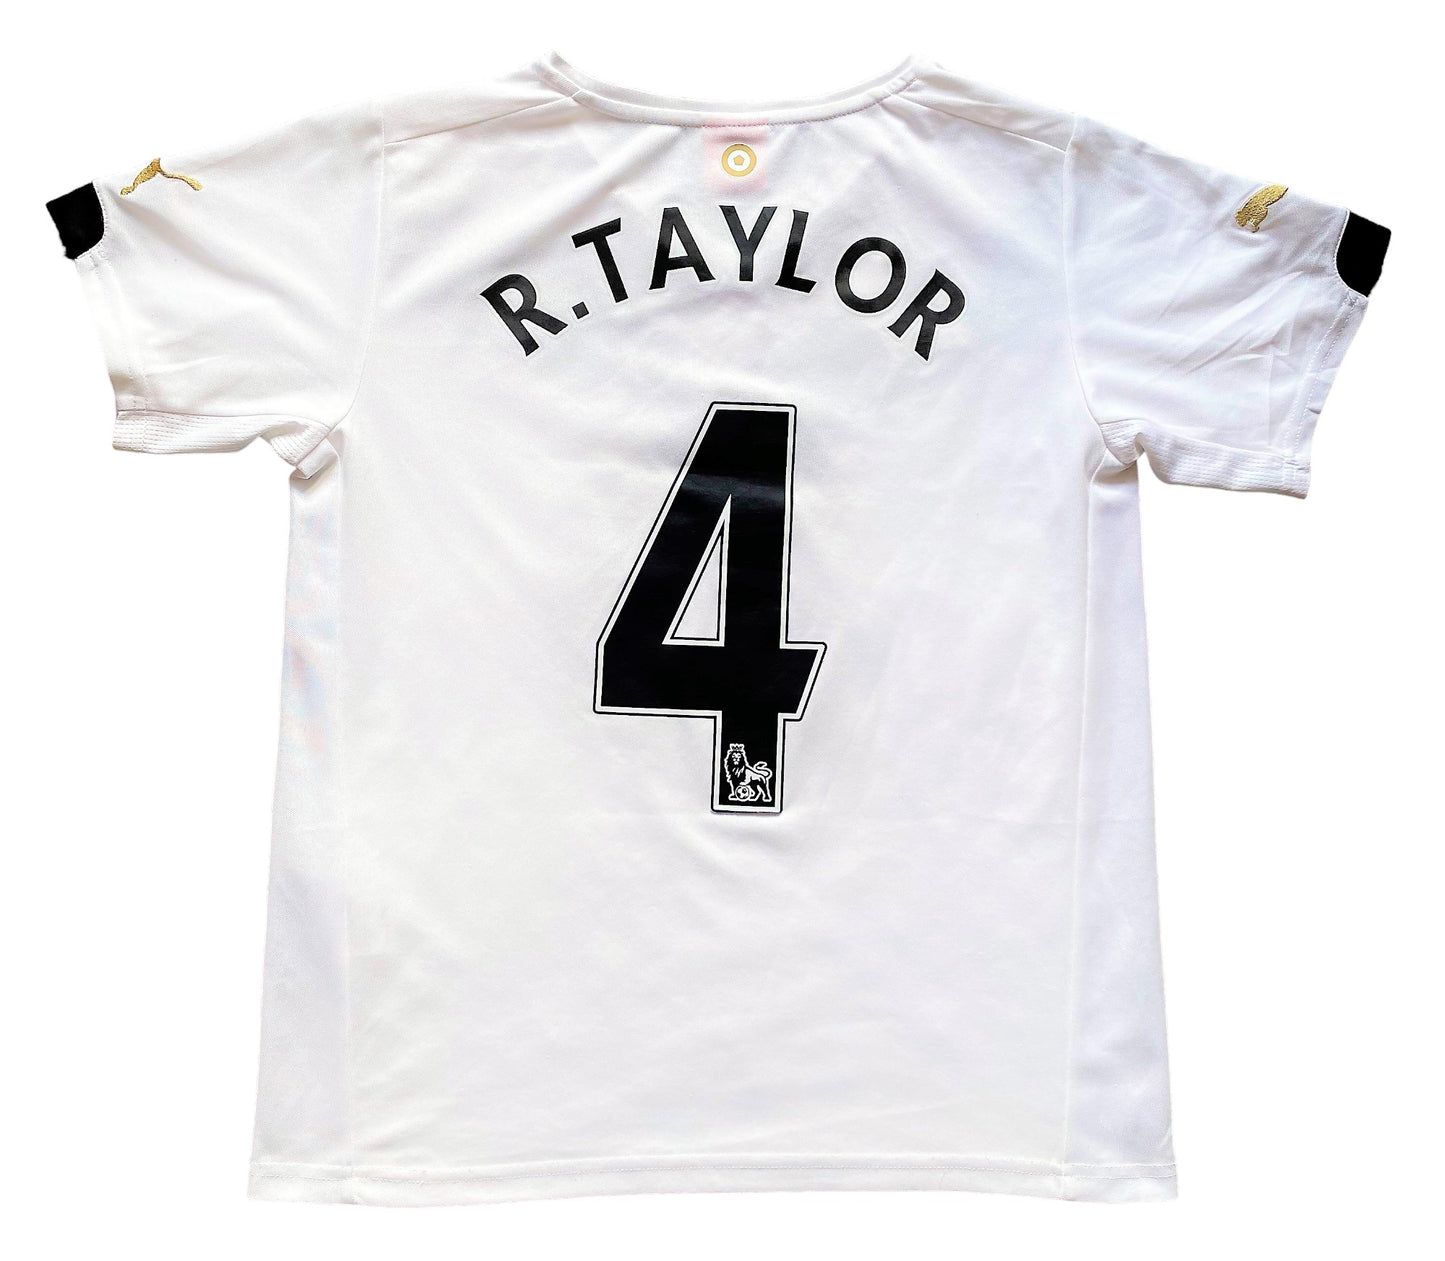 Newcastle Special Edition Shirt 2014/15 R.TAYLOR 4 (very good) AdultsS.XL youth. Height 20 inches